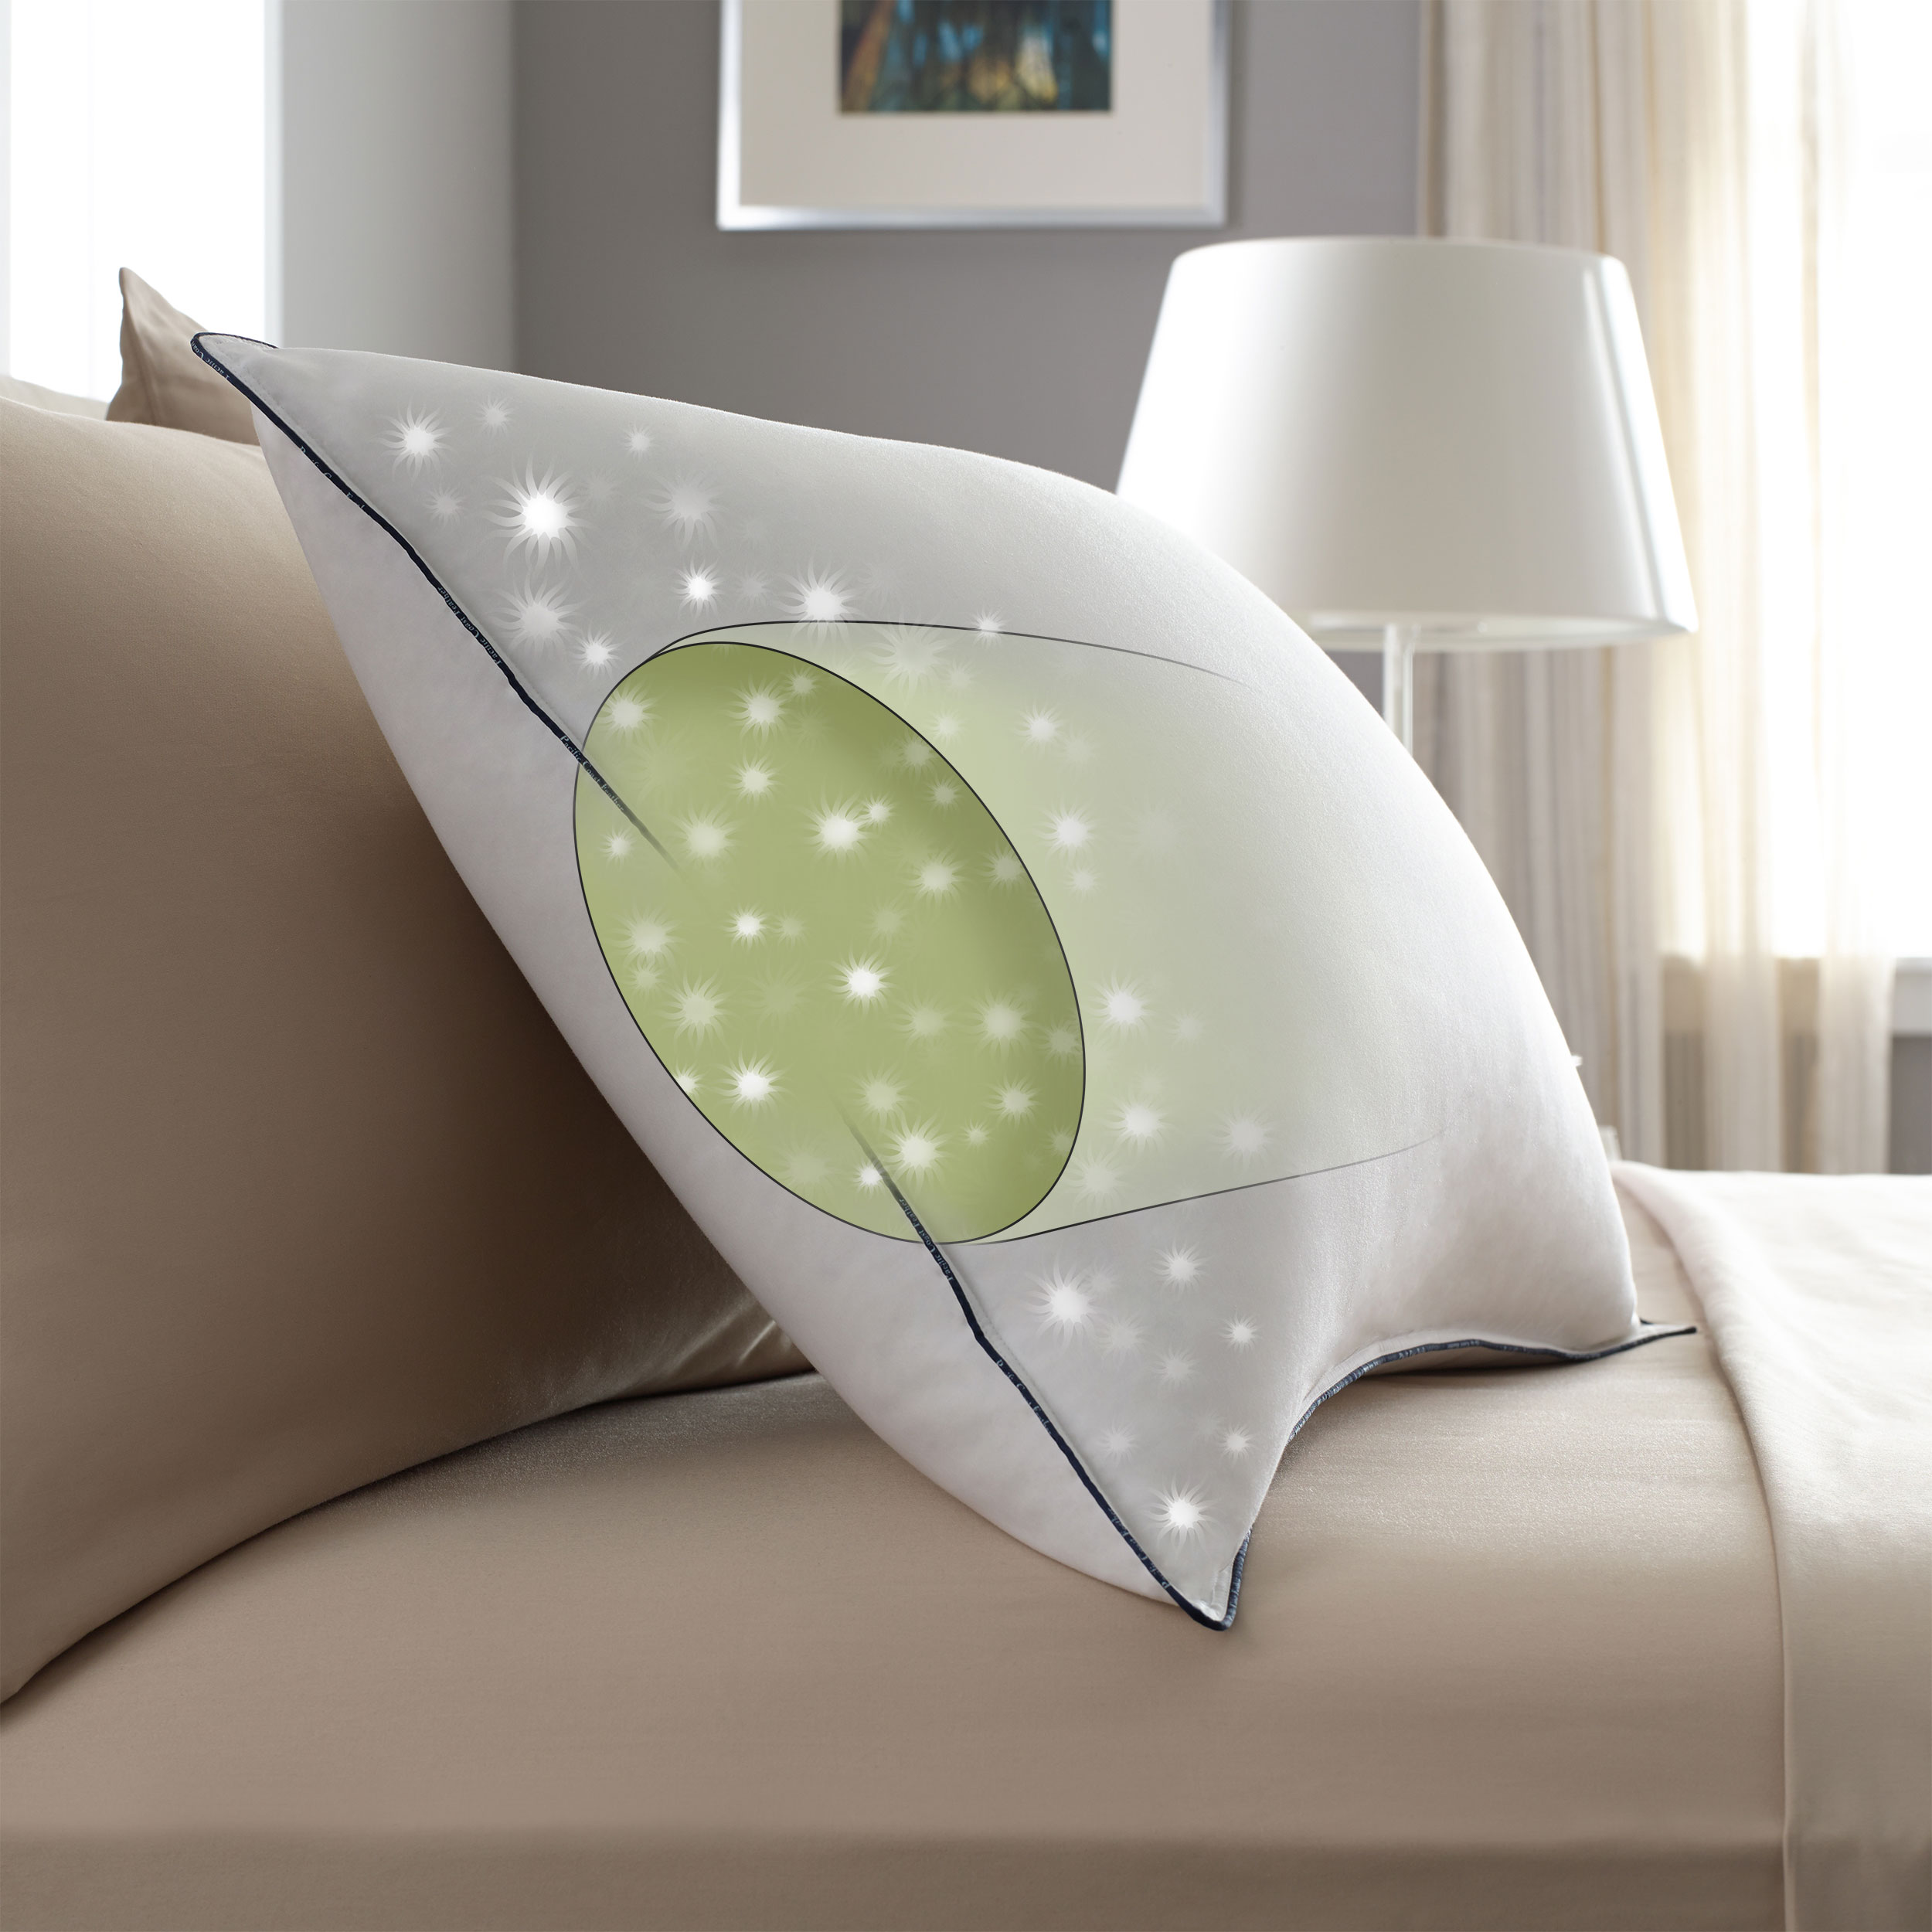 Pacific Coast® Pillow in pillow